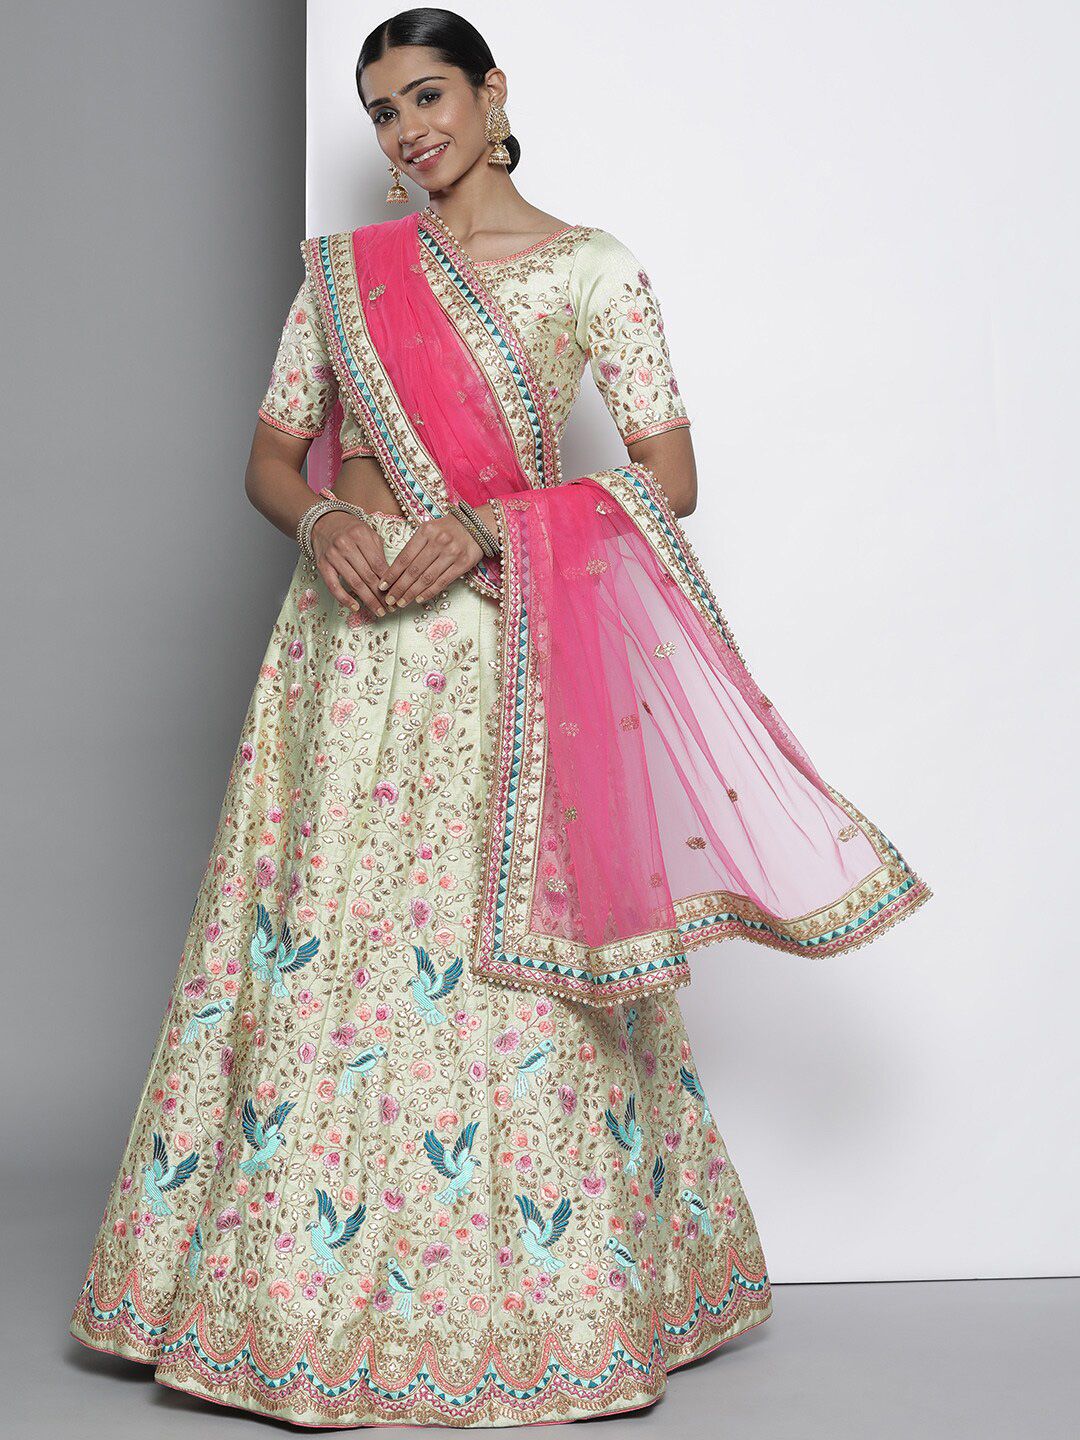 Fusionic Embroidered Thread Work Semi-Stitched Lehenga & Unstitched Blouse With Dupatta Price in India